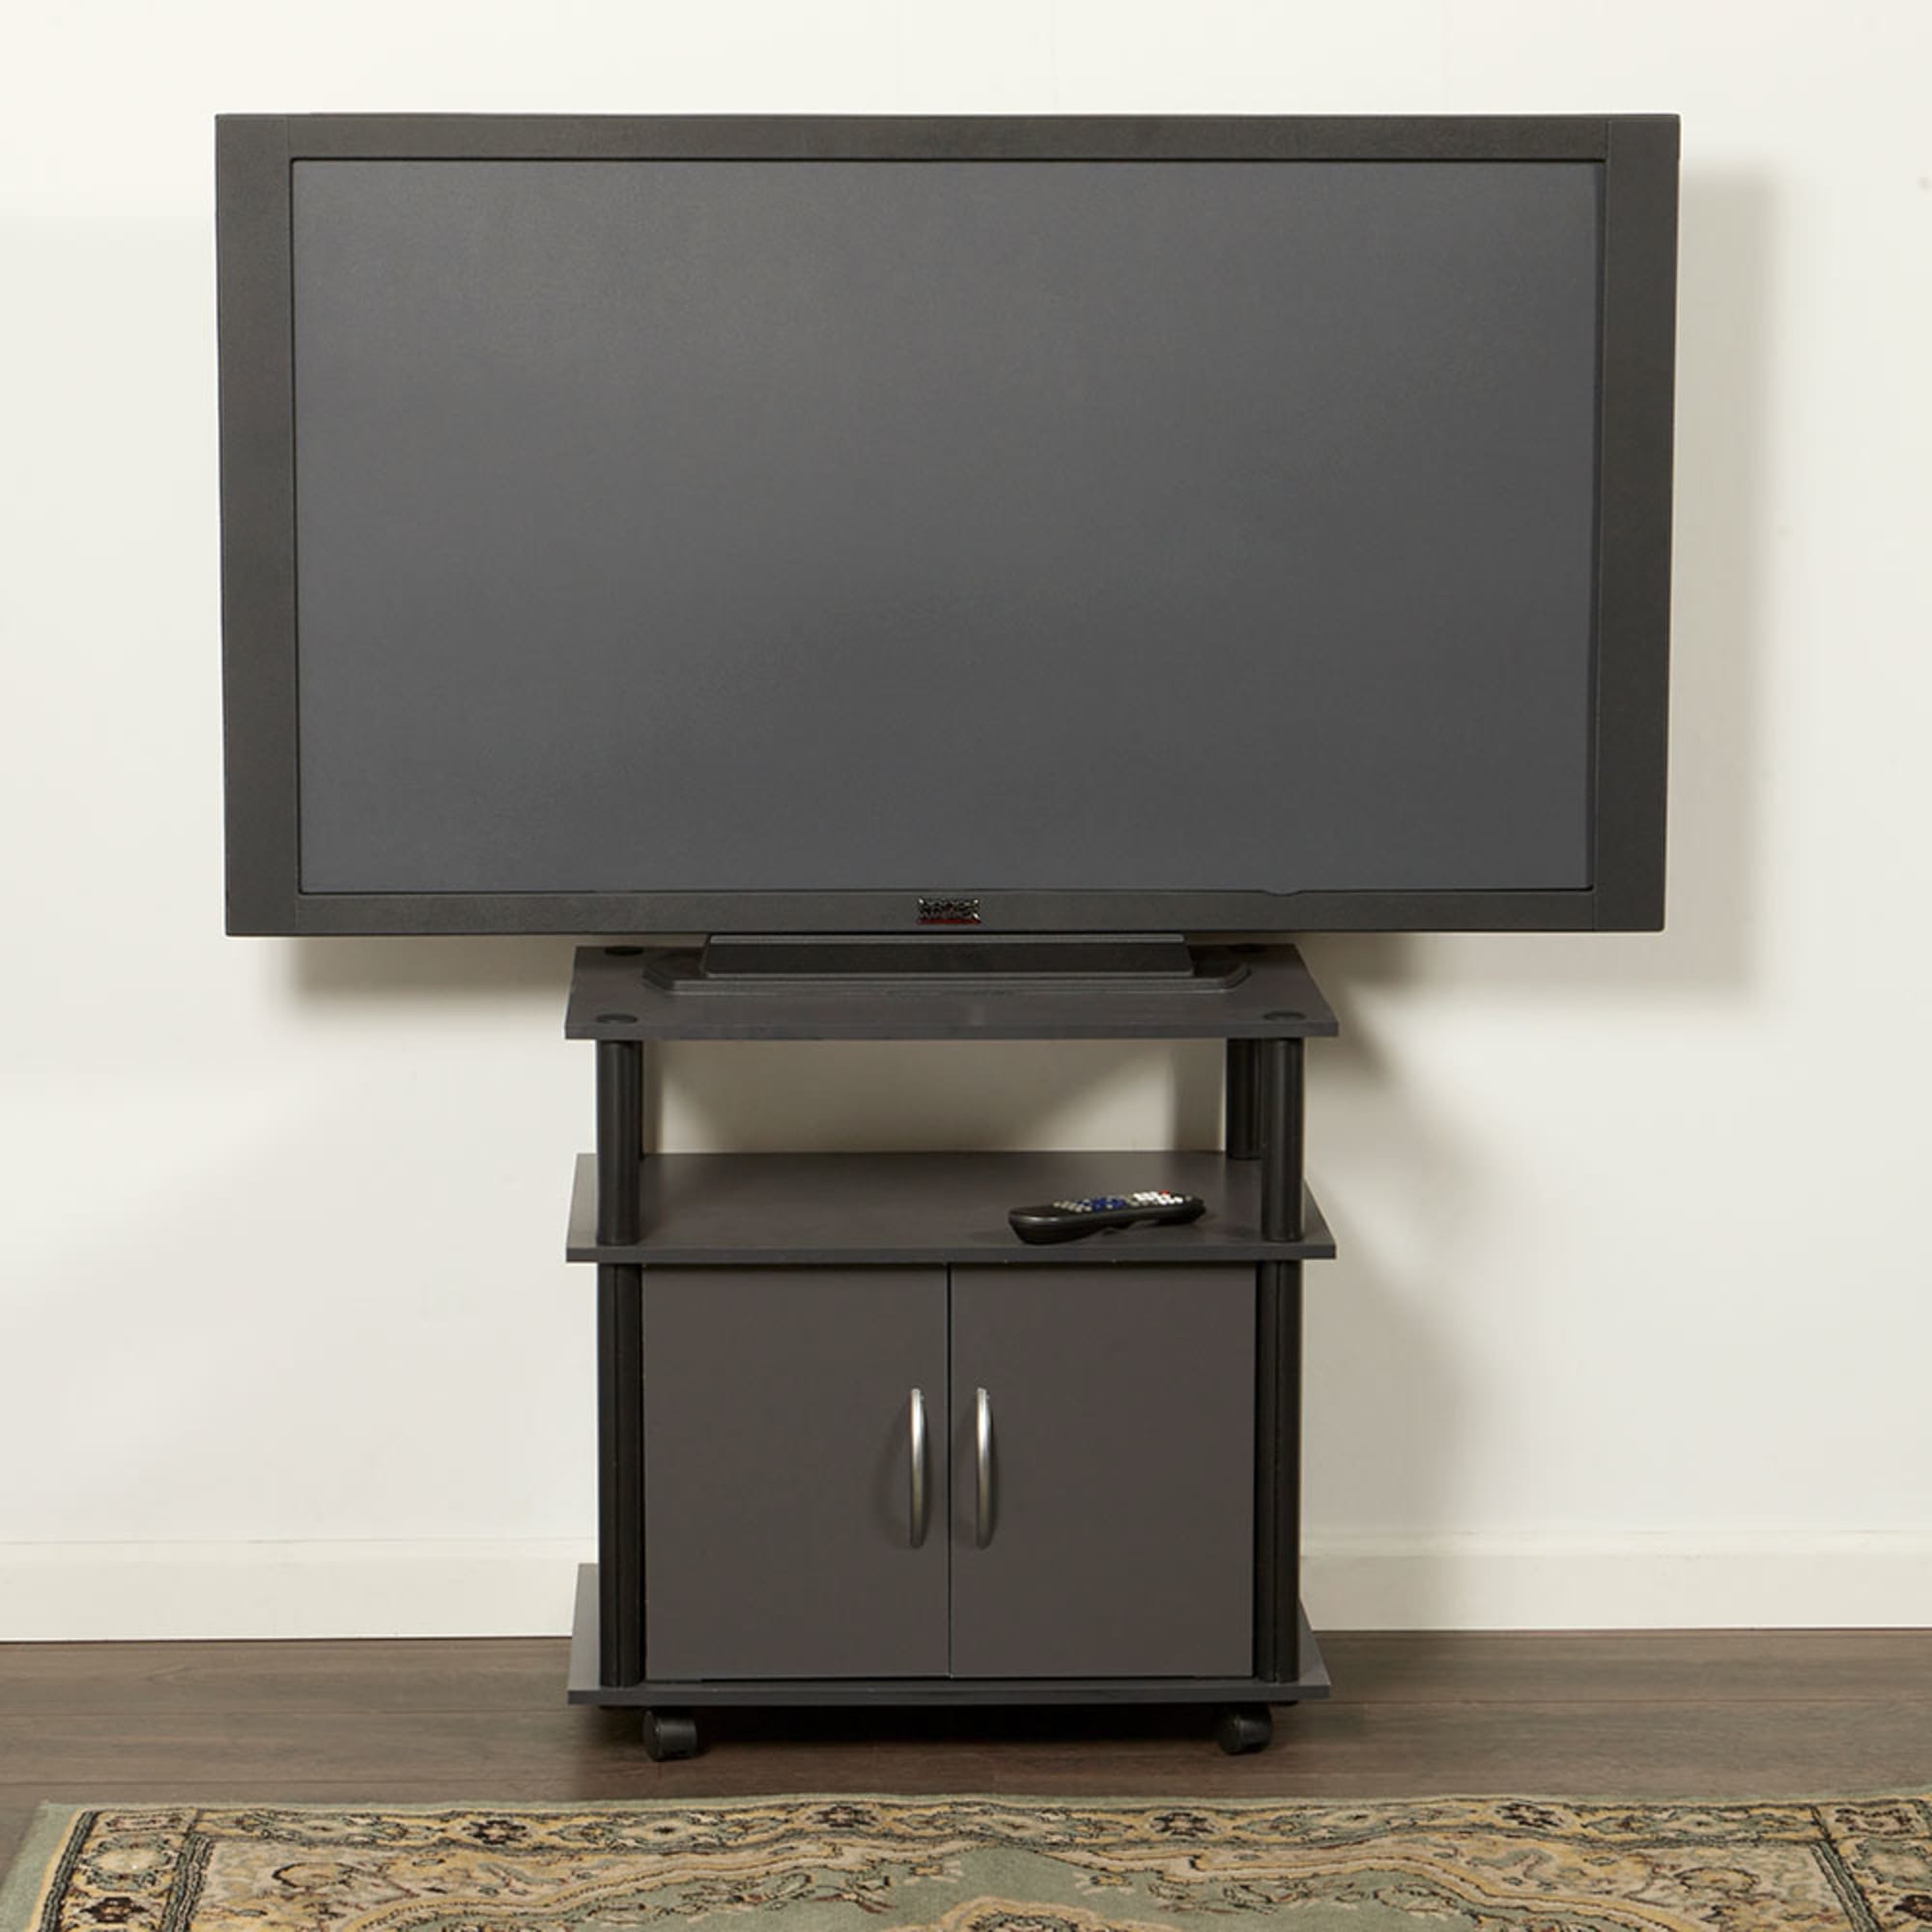 Home Basics TV Stand with Cabinets, Grey
 $40.00 EACH, CASE PACK OF 1